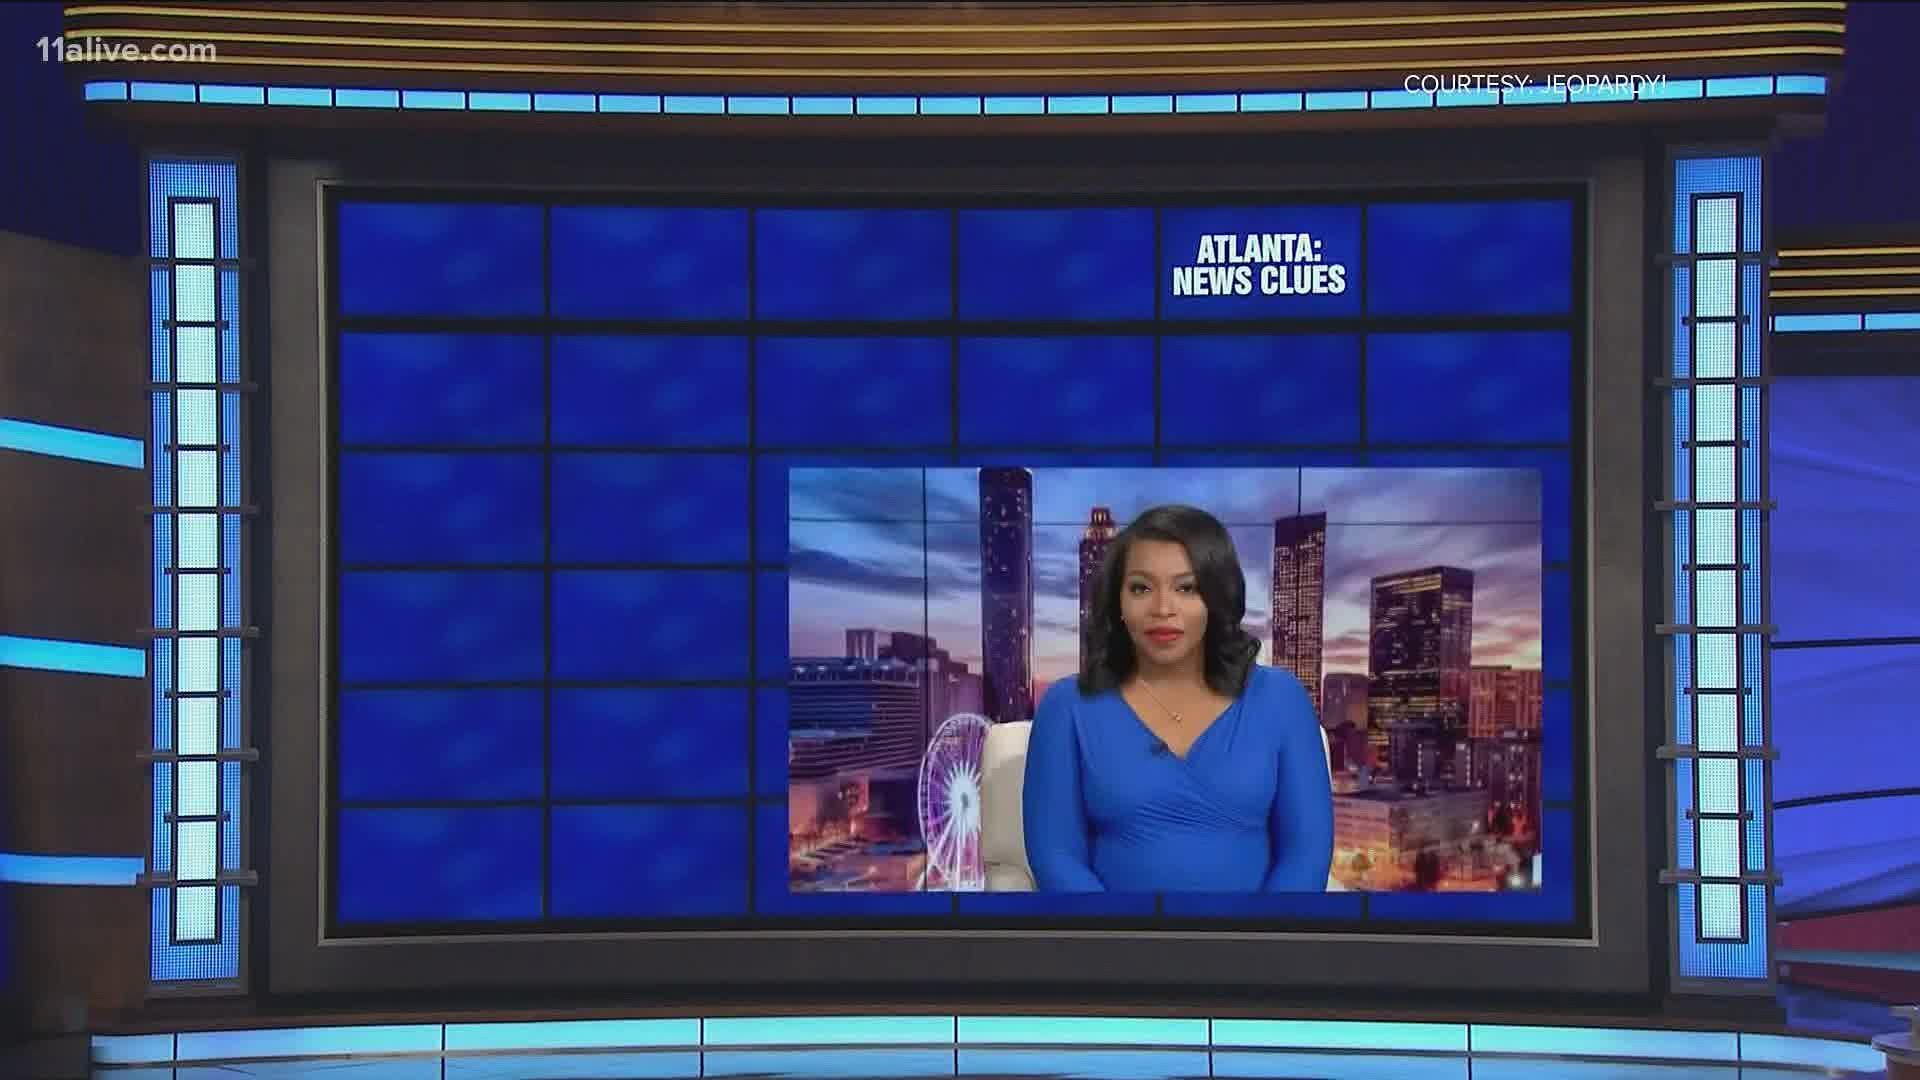 Did you see the familiar faces on Jeopardy! recently?